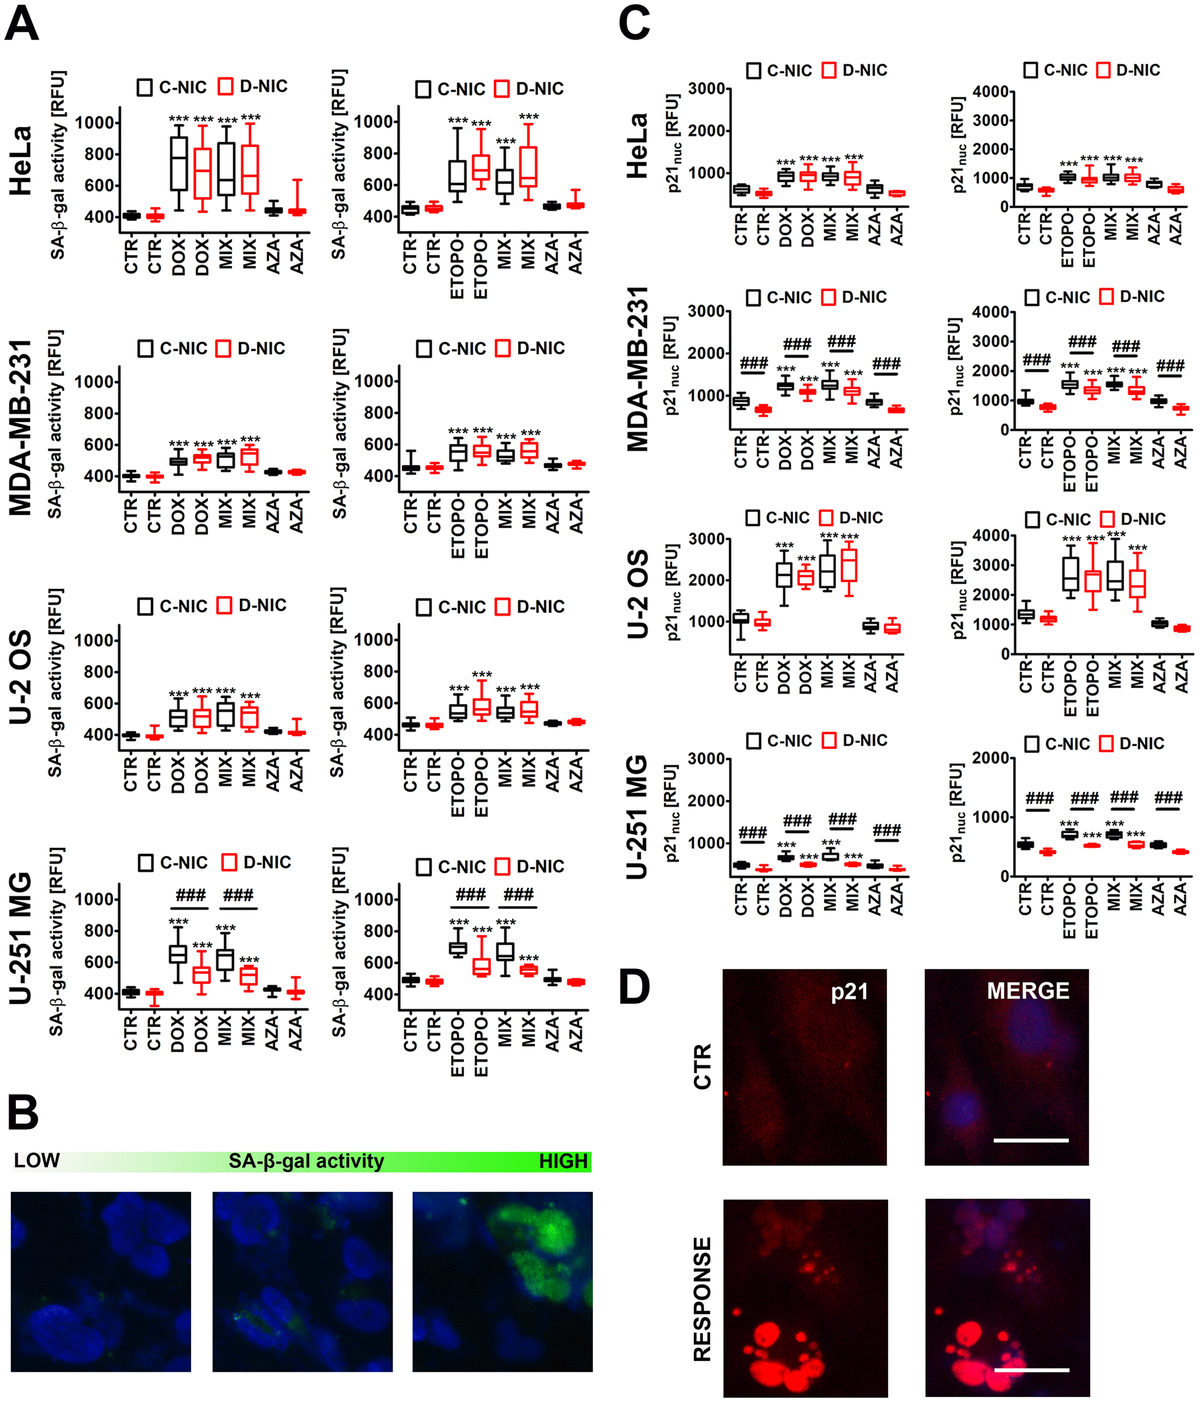 DNMT2/TRDMT1 gene knockout-mediated changes in the levels of senescence-associated-beta-galactosidase (SA-β-gal) positive cells (A, B) and nuclear p21 pools (C, D) in four cancer cell lines treated with DOX or ETOPO. (A, B) Cellular senescence was revealed using imaging cytometry. SA-β-gal activity is presented as relative fluorescence units (RFU). (B) Representative microphotographs are shown, objective 20x, nucleus staining (blue), SA-β-gal staining (green). (C, D) Nuclear p21 immuno-staining. (C) Nuclear p21 levels are presented as relative fluorescence units (RFU). (D) Representative microphotographs are shown, objective 20x, nucleus staining (blue), nuclear p21 immuno-staining (red), RESPONSE, representative DOX or ETOPO treatment. (A, C) Box and whisker plots are shown, n = 3, ***p a posteriori test), ###pa posteriori test). CTR, control conditions; DOX, doxorubicin treatment; ETOPO, etoposide treatment; AZA, azacytidine treatment; MIX, azacytidine post-treatment; C-NIC, control cells with unmodified levels of DNMT2/TRDMT1 containing control plasmid; D-NIC, cells with DNMT2/TRDMT1 gene knockout containing dedicated DNMT2 double nickase plasmid.